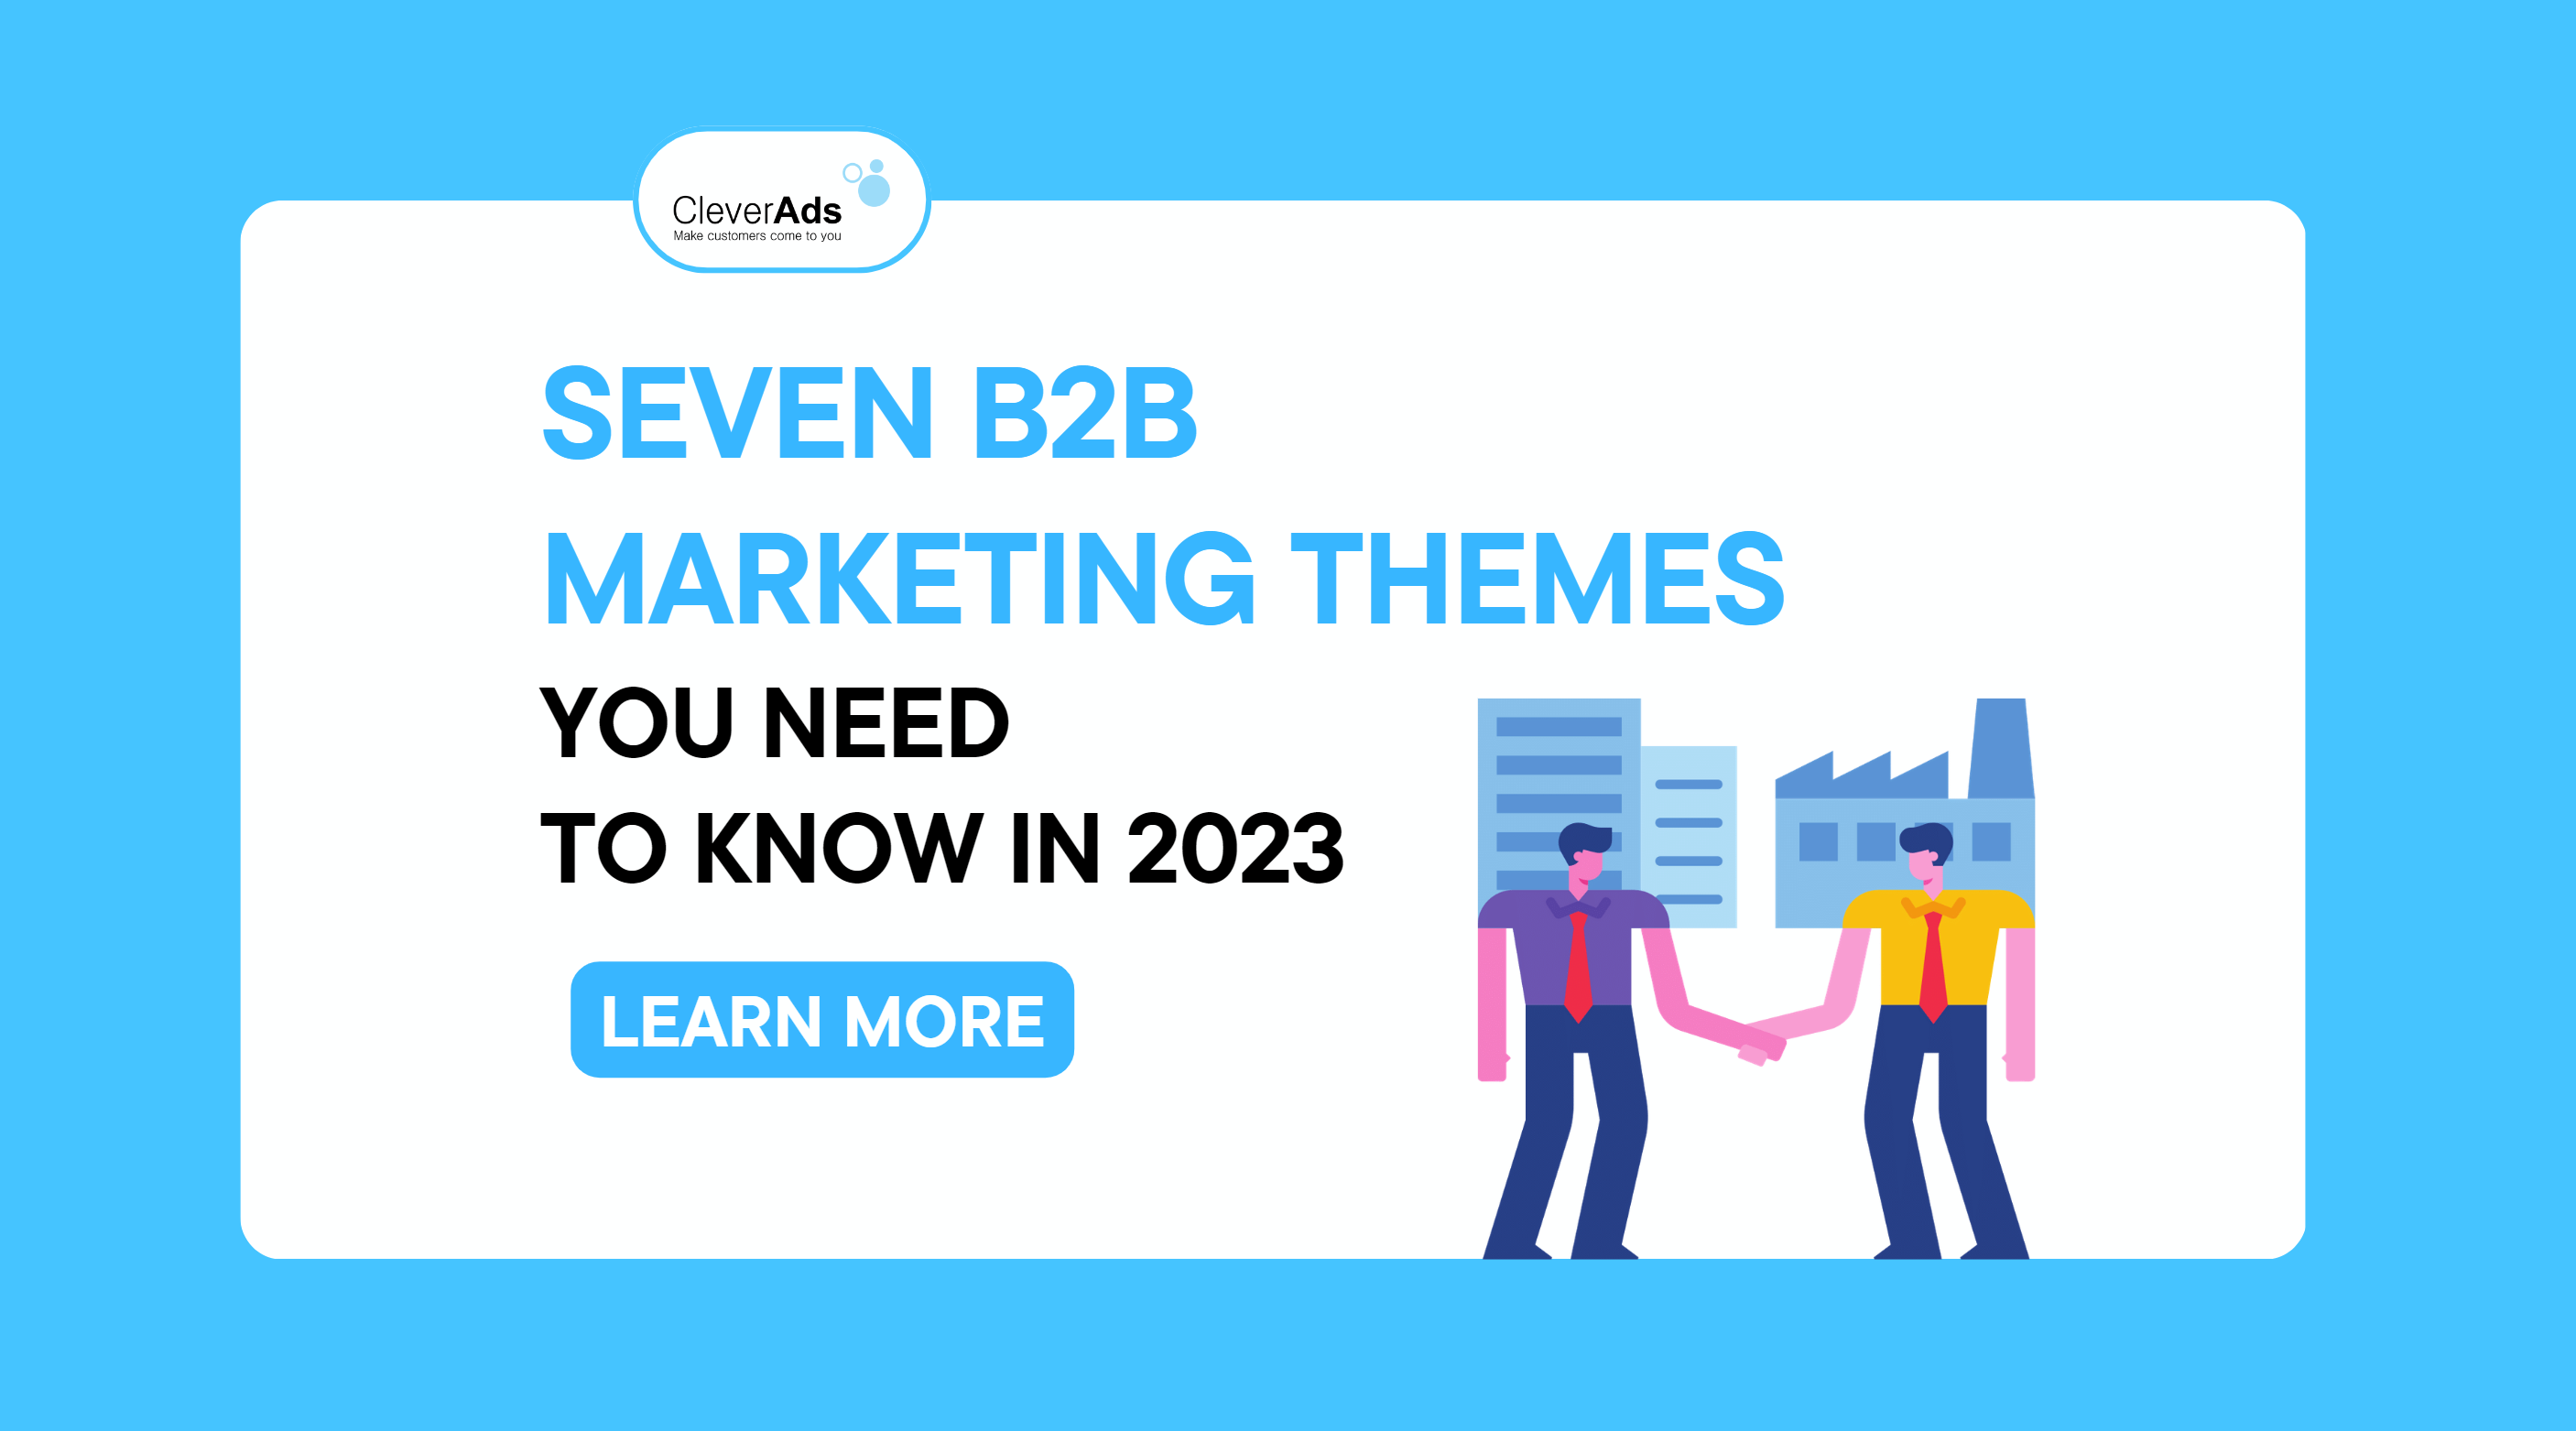 SEVEN B2B MARKETING THEMES YOU NEED TO KNOW IN 2023